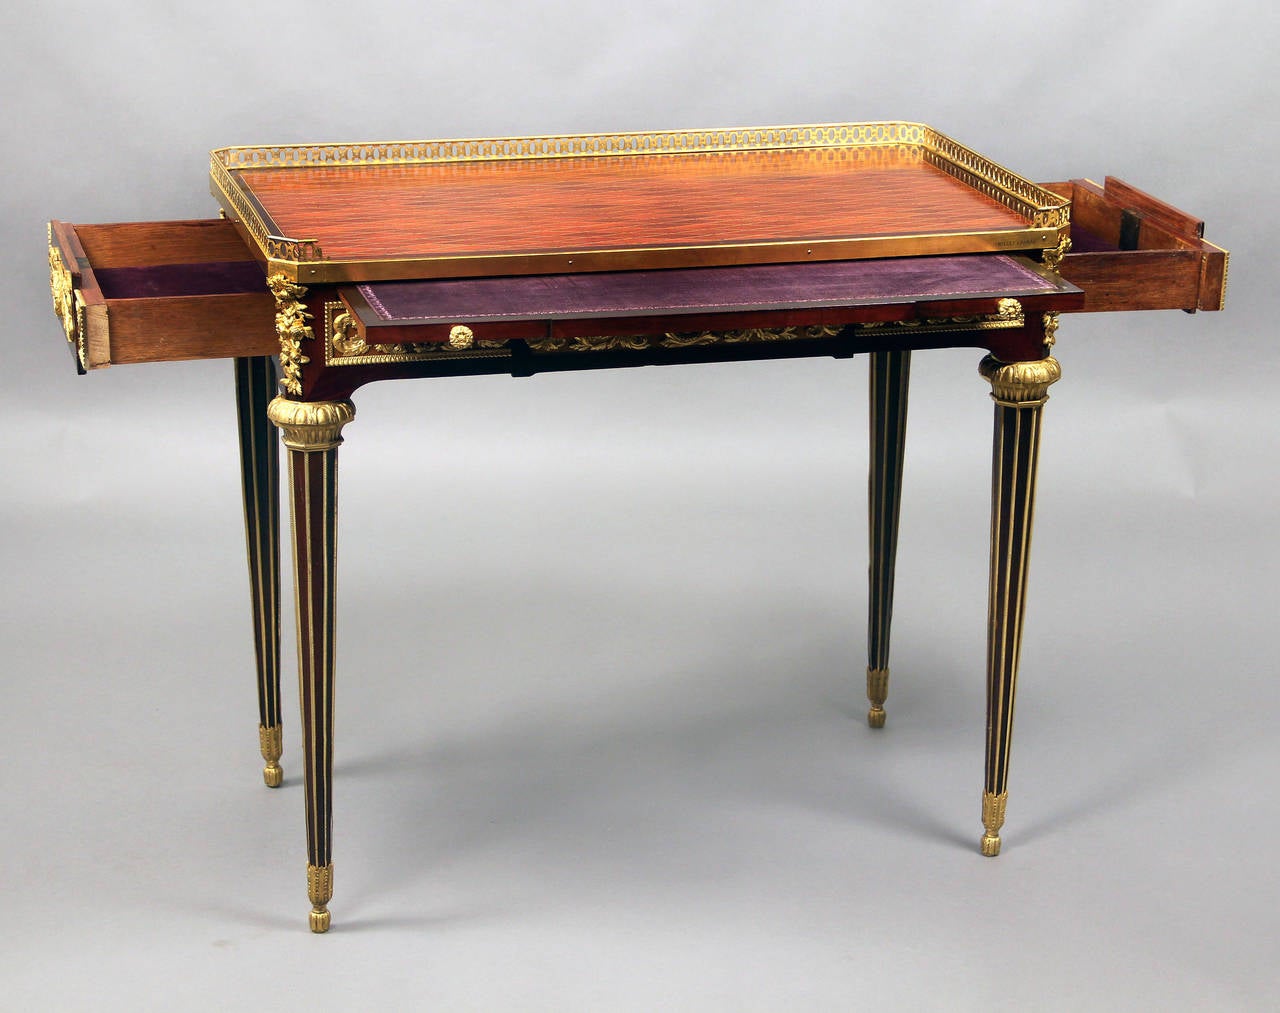 A very Fine late 19th century gilt bronze-mounted Louis XVI style mahogany and sycamore writing table

by Maison Millet

Diamond parquetry top above a foliate scrolled frieze with a velvet lined pull-out writing slide. Each side similarly